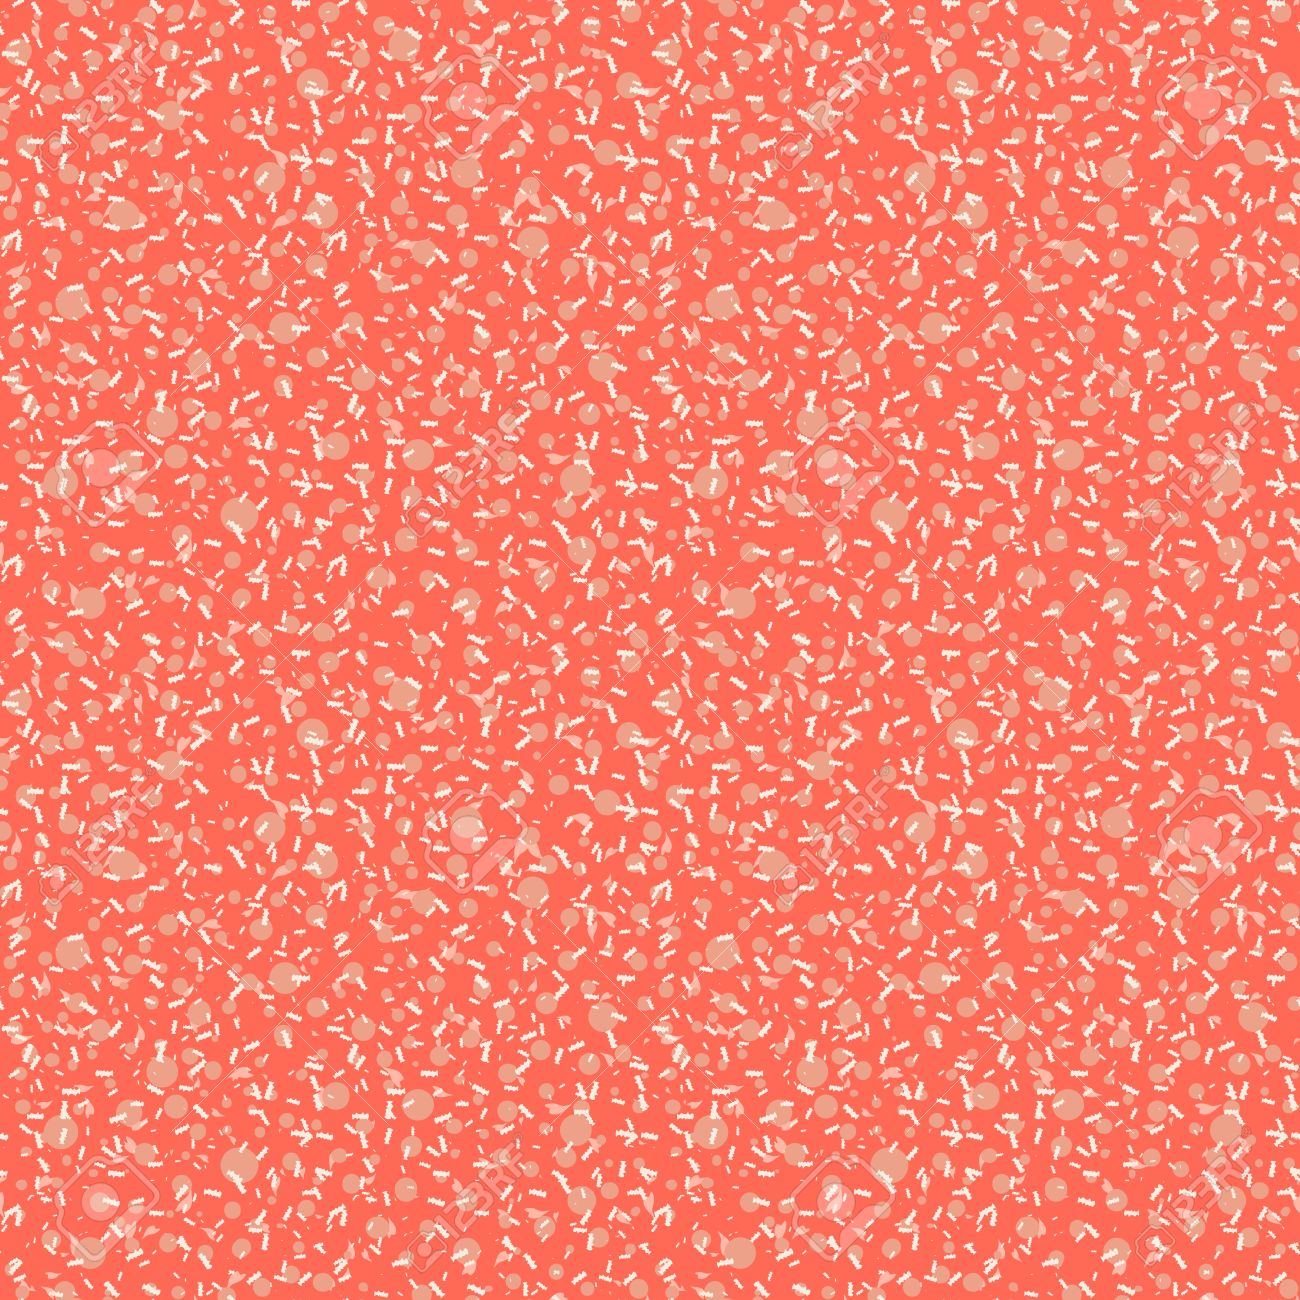 Seamless Retro Pattern With Scattered Microscopic Dots In 1950s